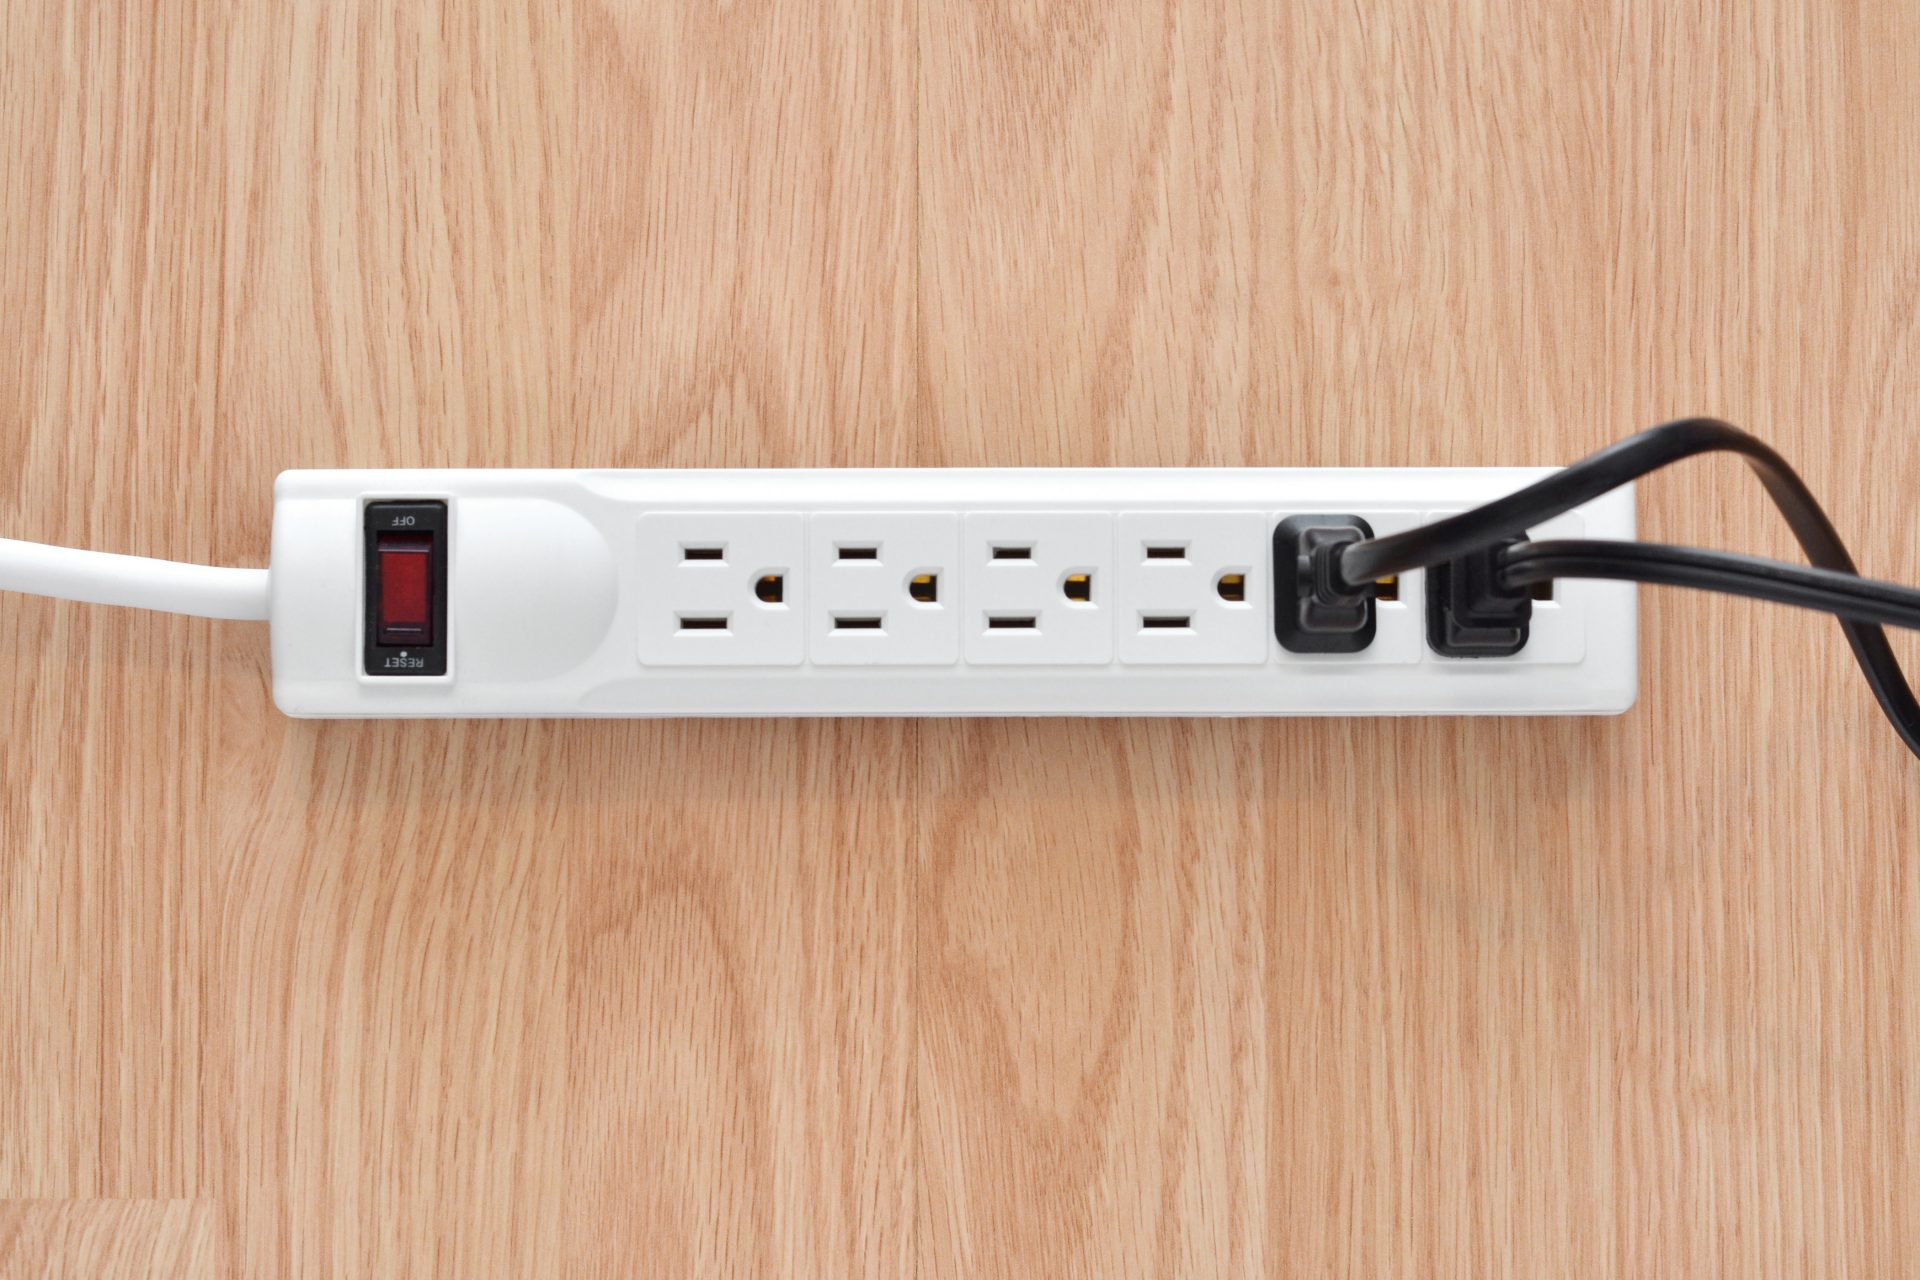 Vampire power stopped by power strip